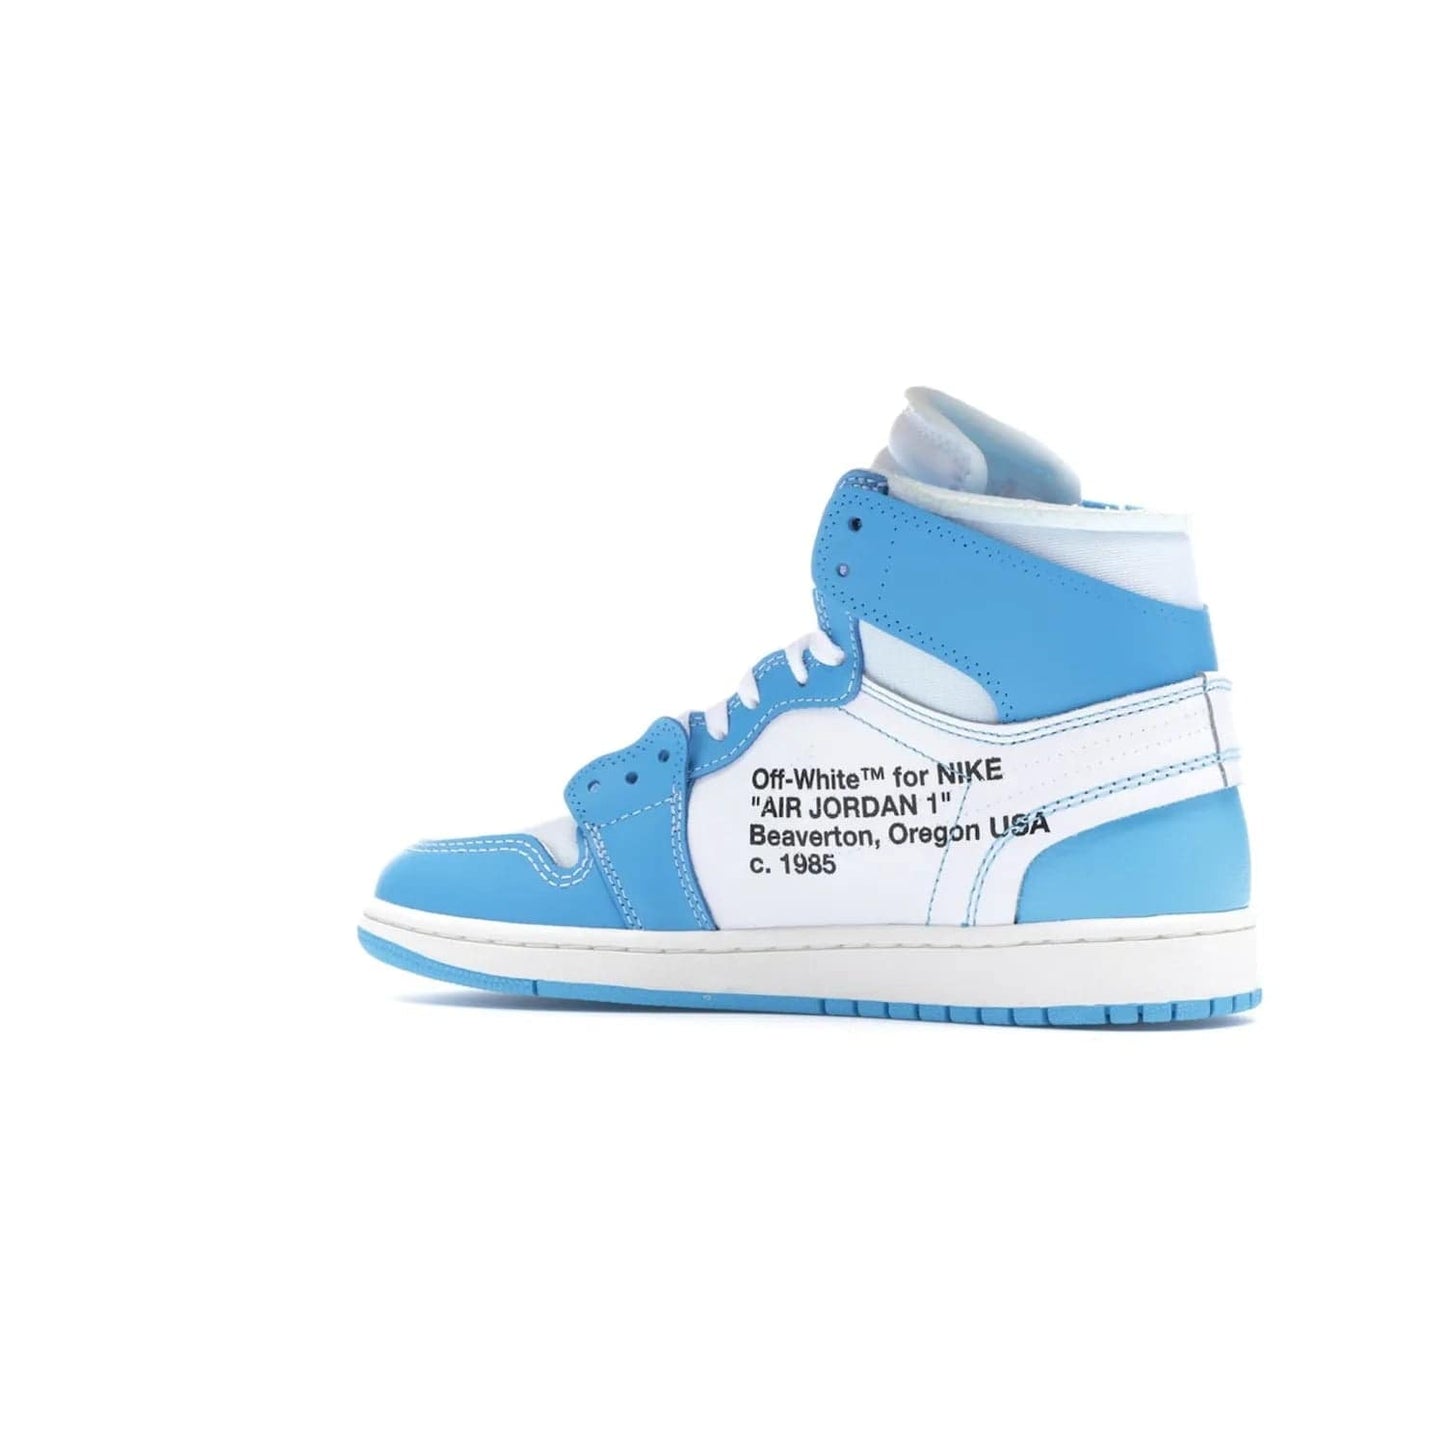 Jordan 1 Retro High Off-White University Blue - Image 22 - Only at www.BallersClubKickz.com - Classic Jordan 1 Retro High "Off-White UNC" sneakers meld style and comfort. Boasting deconstructed white and blue leather, Off-White detailing, and a white, dark powder blue and cone colorway, these sneakers are perfect for dressing up or down. Get the iconic Off-White Jordan 1's and upgrade your look.